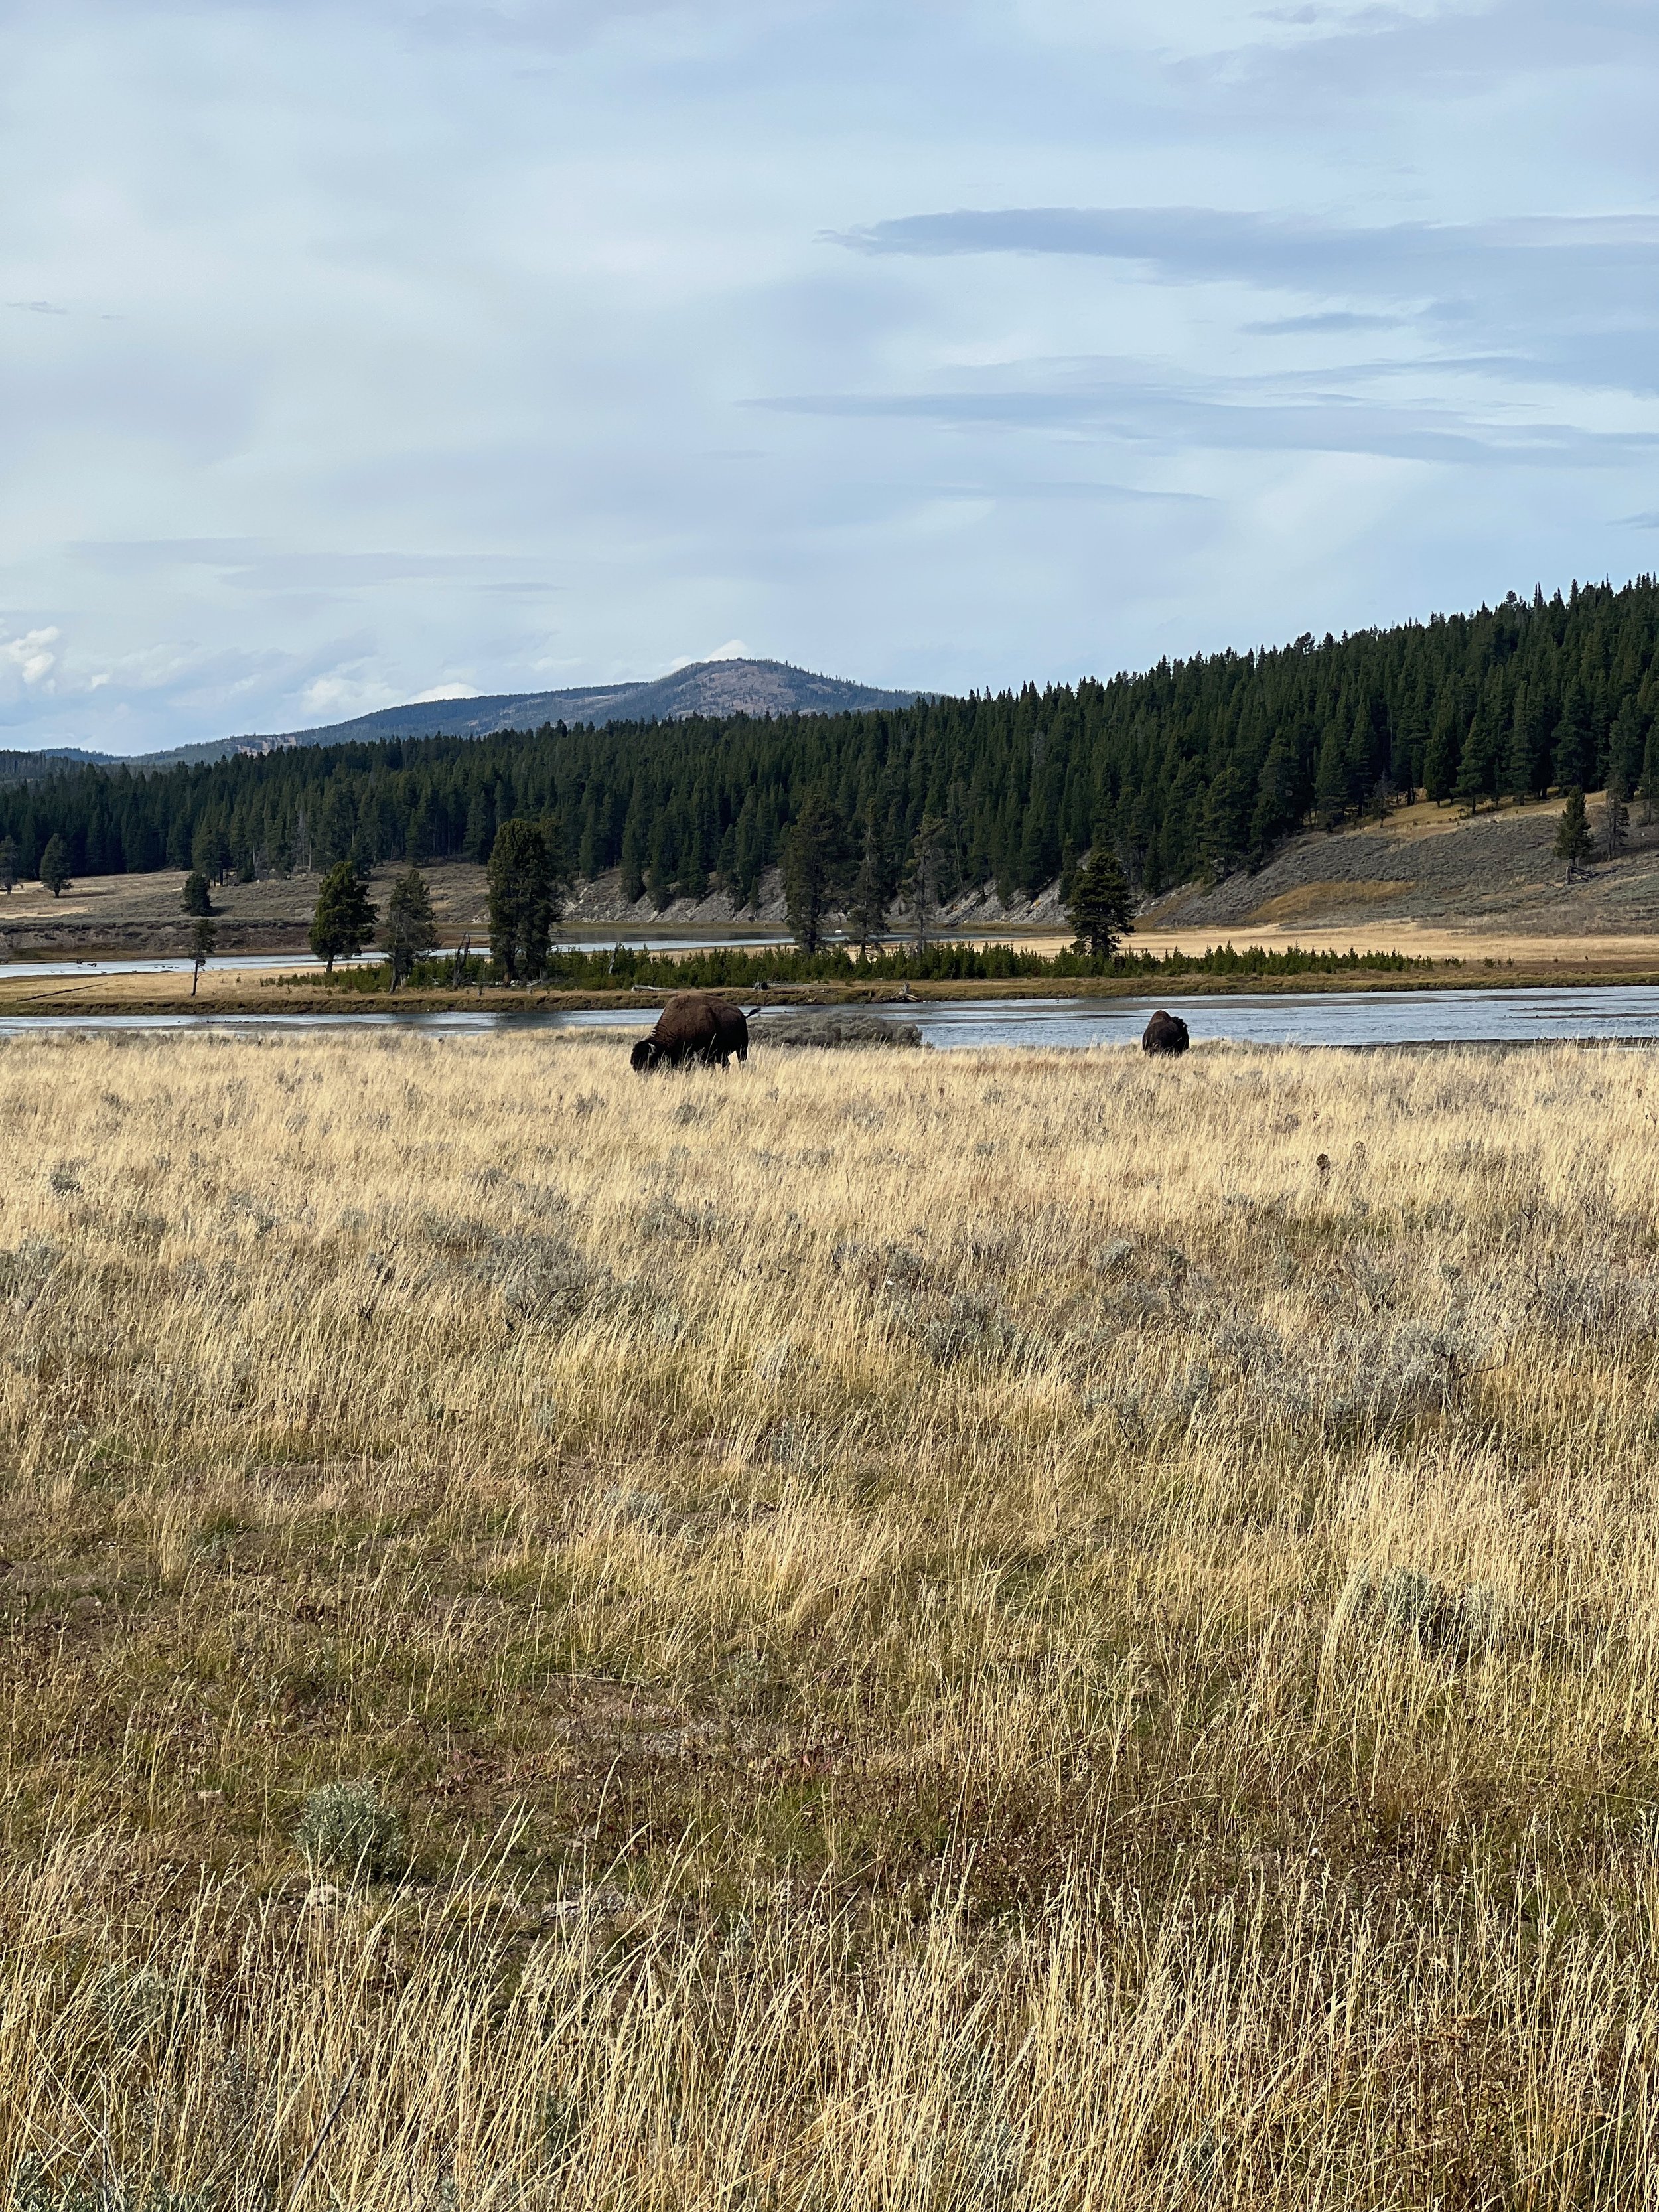 Bison on the plains wyoming.jpeg